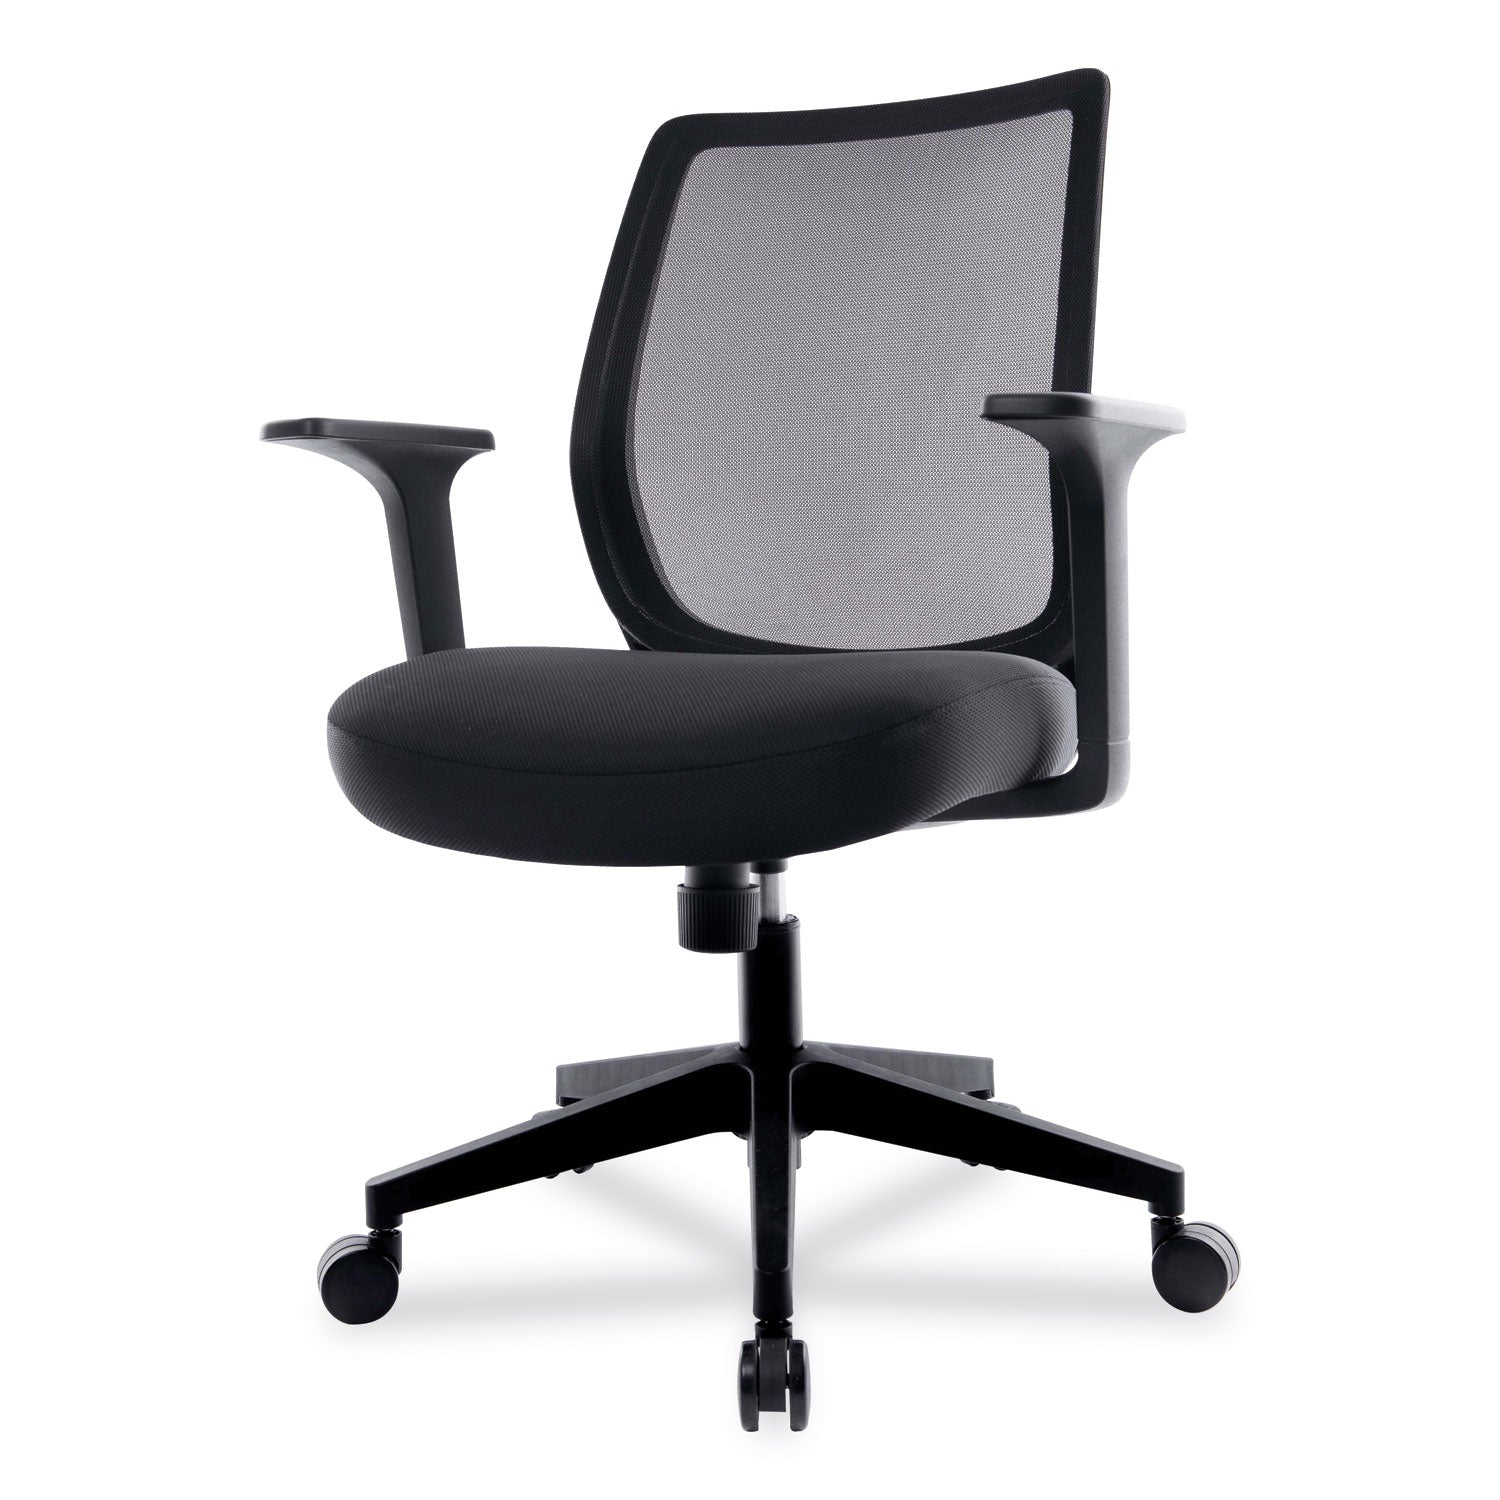 essentials-mesh-back-fabric-task-chair-with-arms-supports-up-to-275-lb-black-fabric-seat-black-mesh-back-black-base_uos24398920 - 3